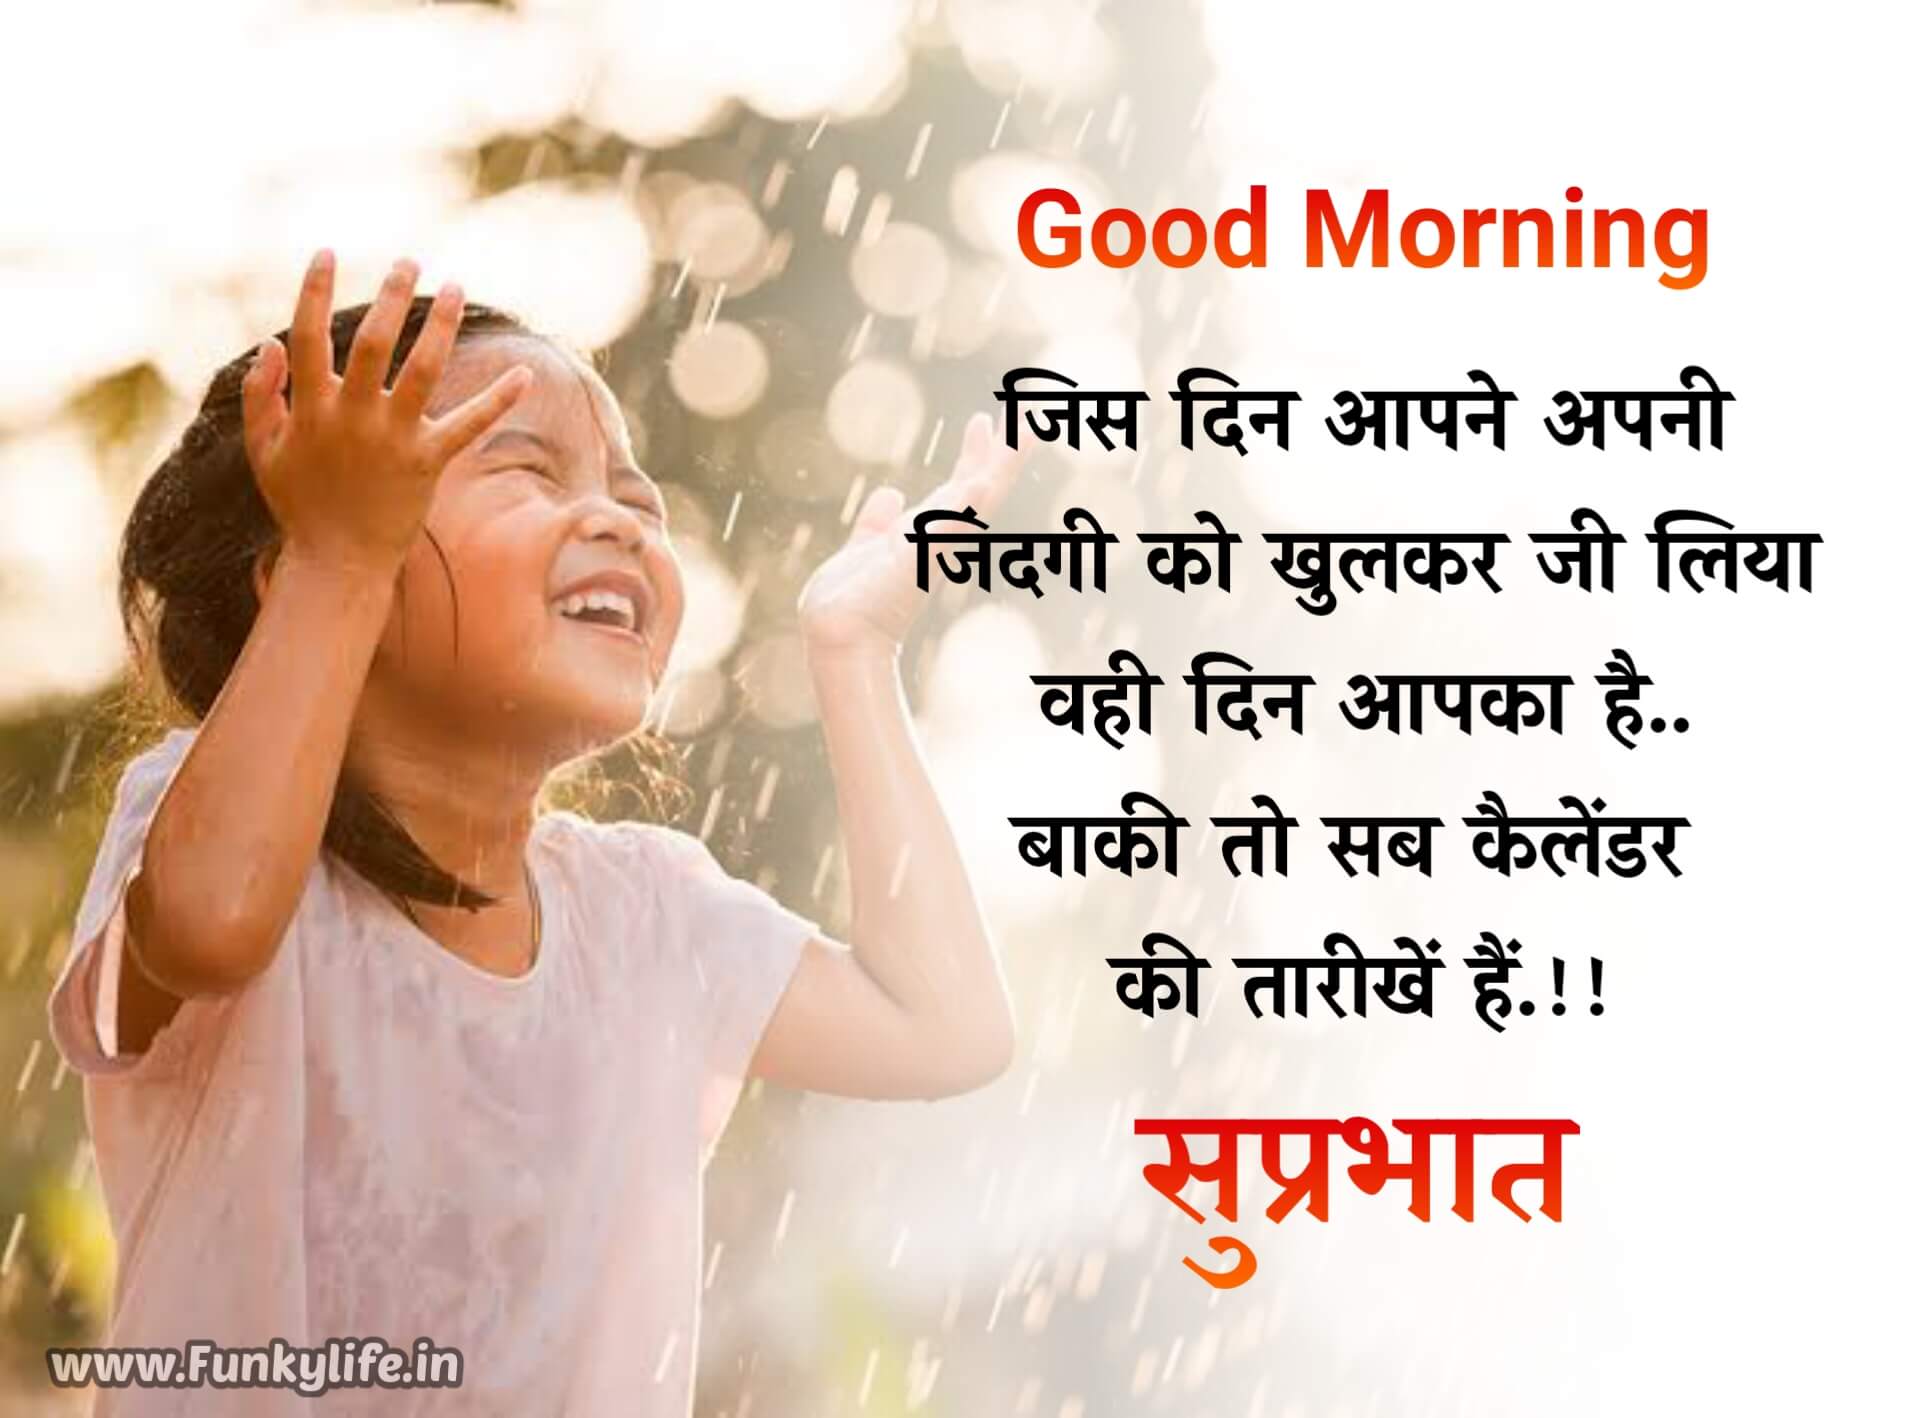 good morning quotes in hindi download